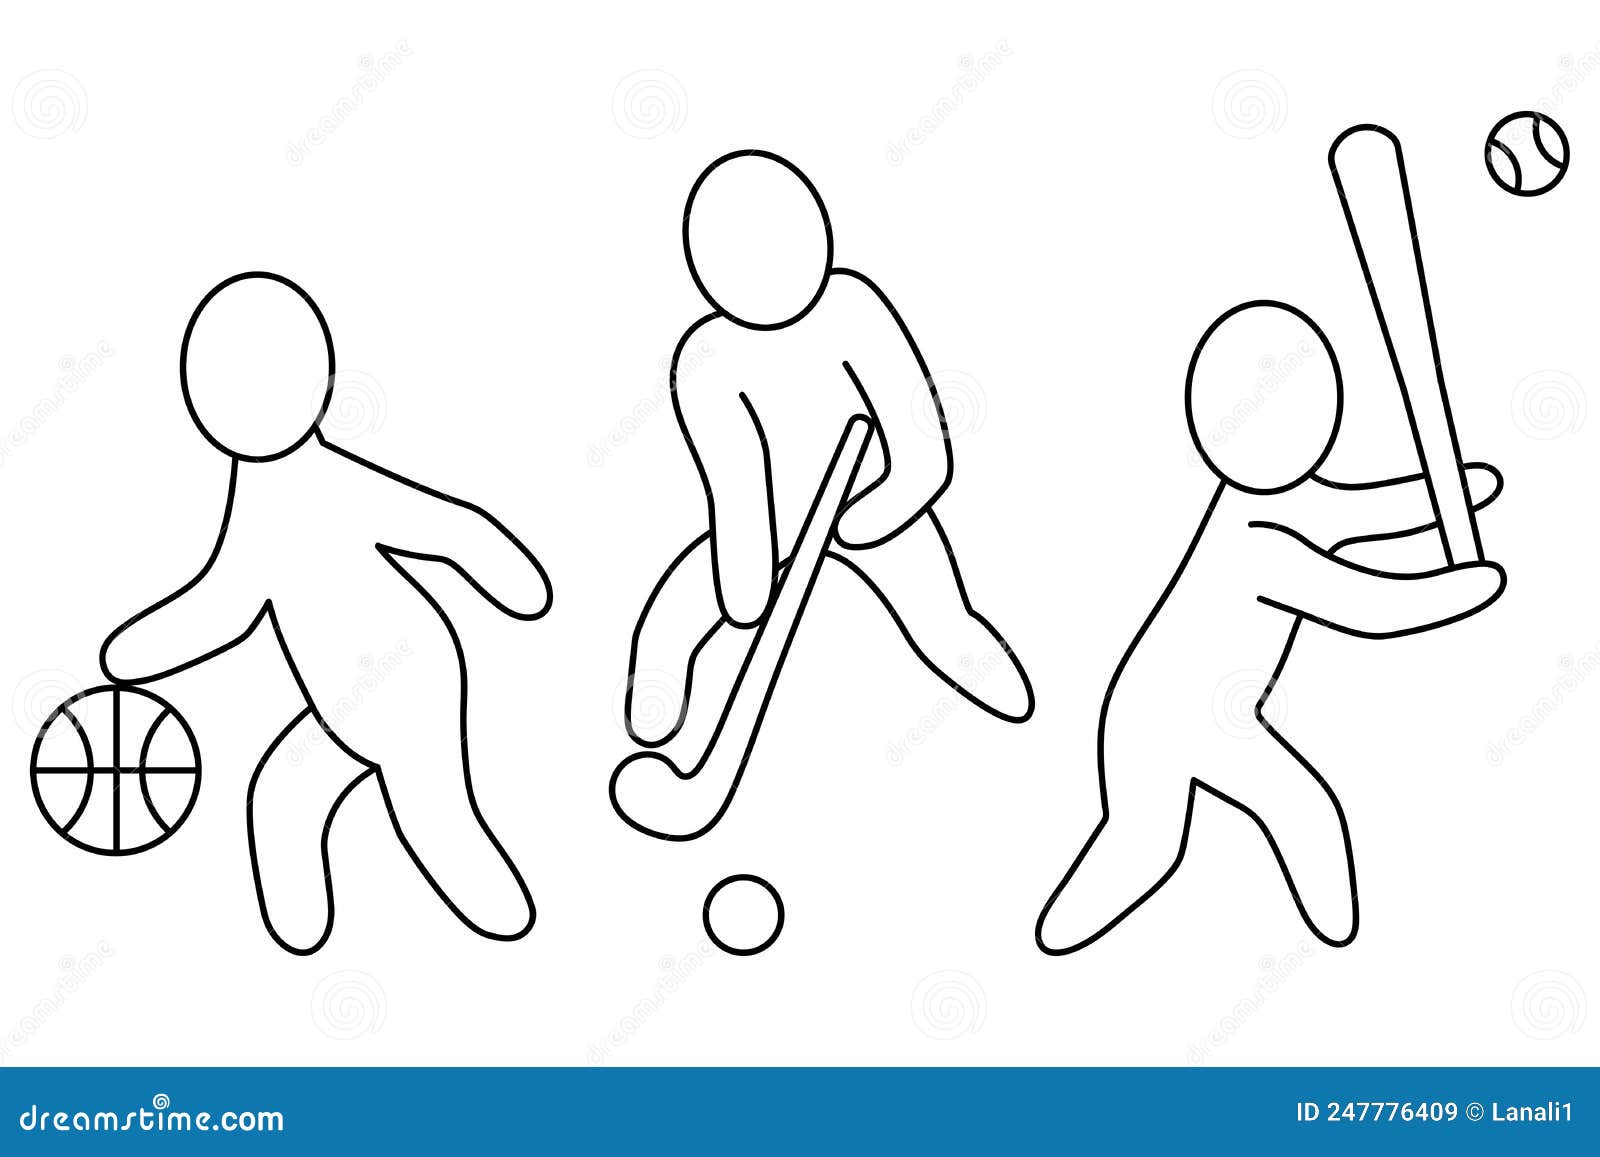 Hockey Sticks Crossed Royalty Free Stock SVG Vector and Clip Art